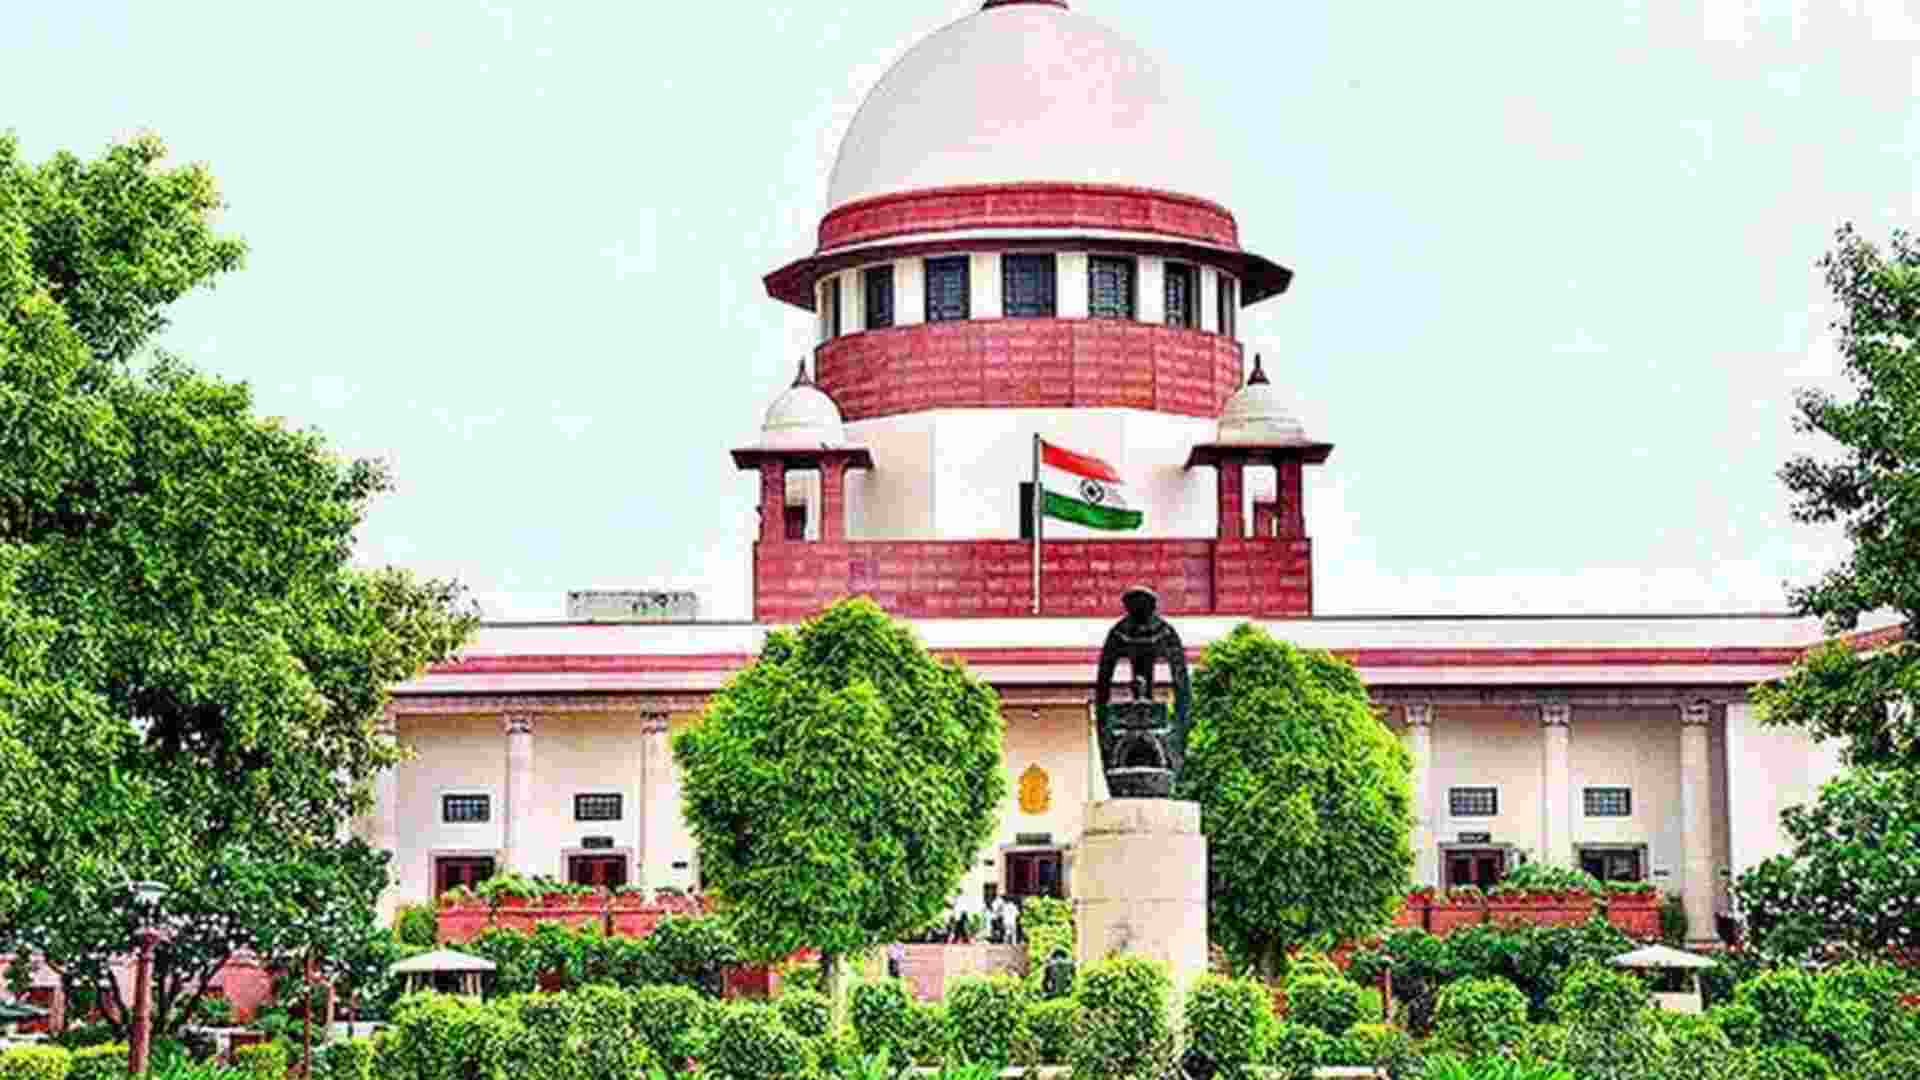 Kawar Yatra Controversy: SC To Hear Petition Against UP Govt’s Name Display Order